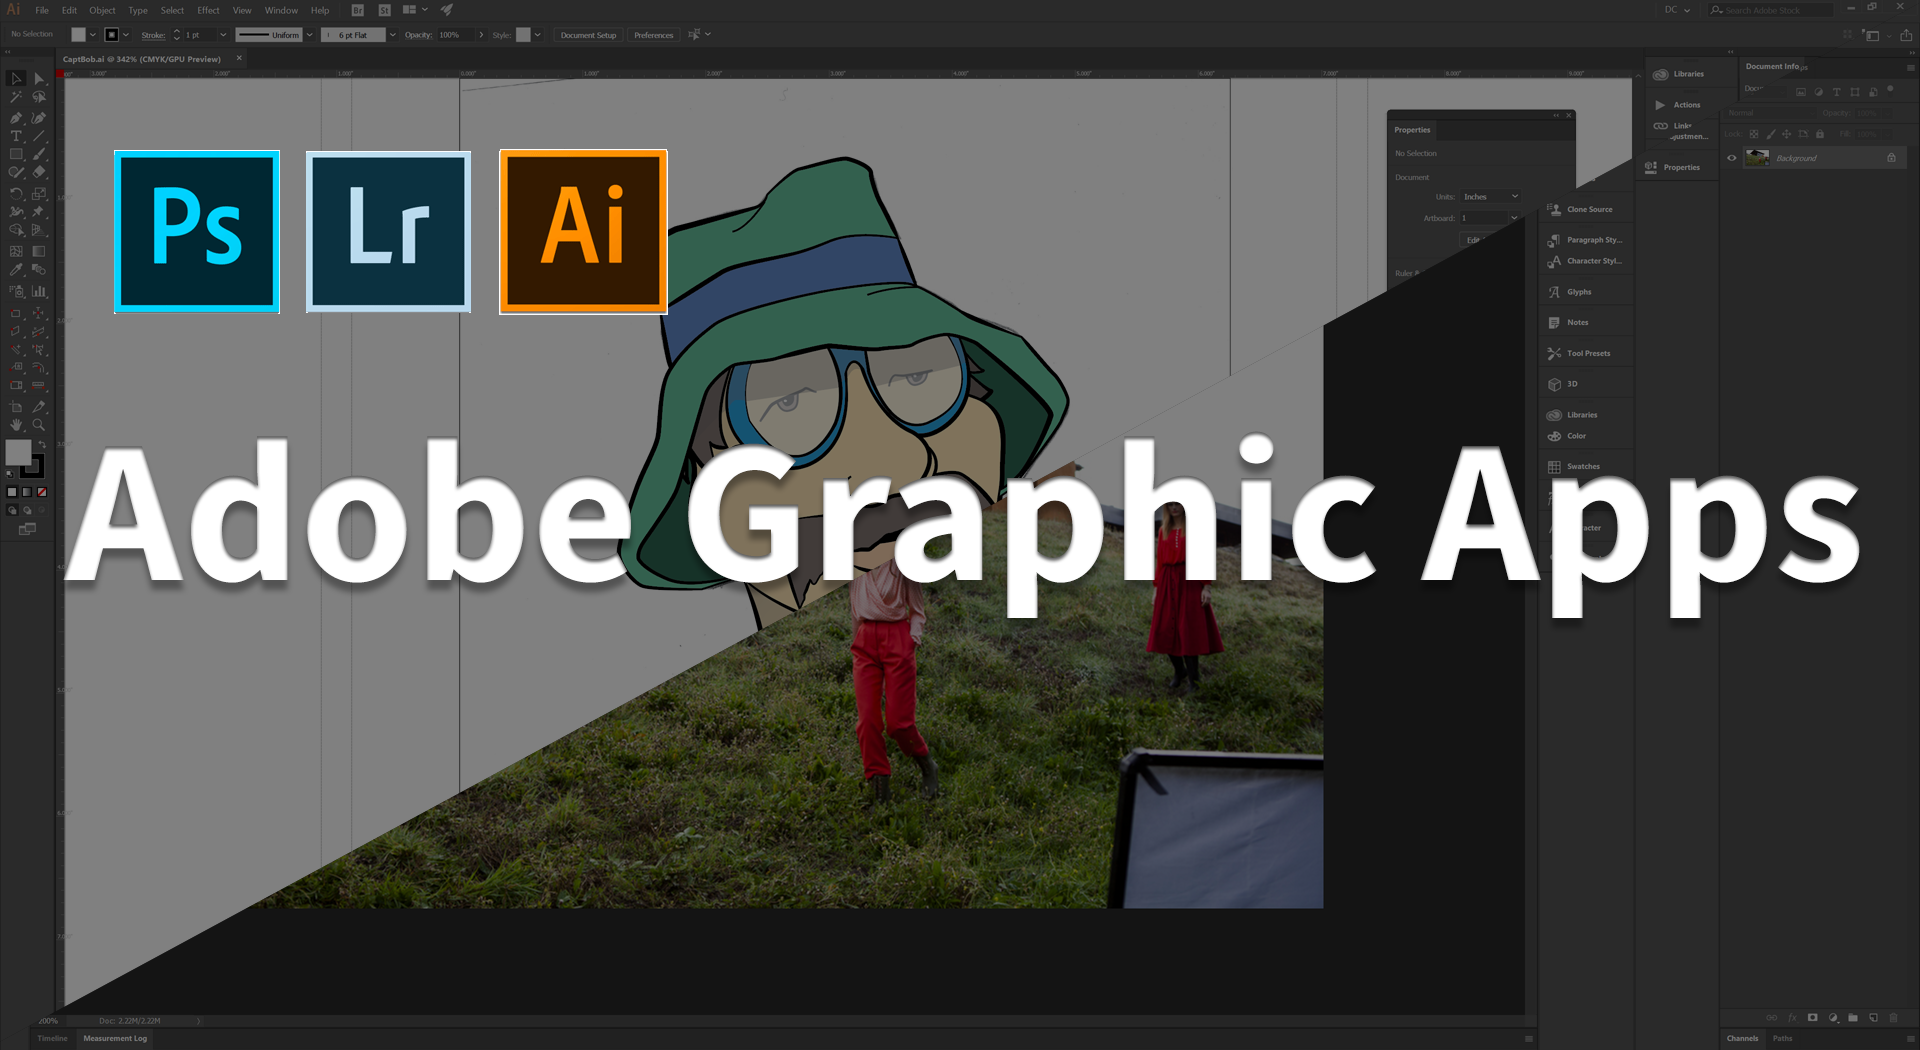 Adobe Graphic Apps